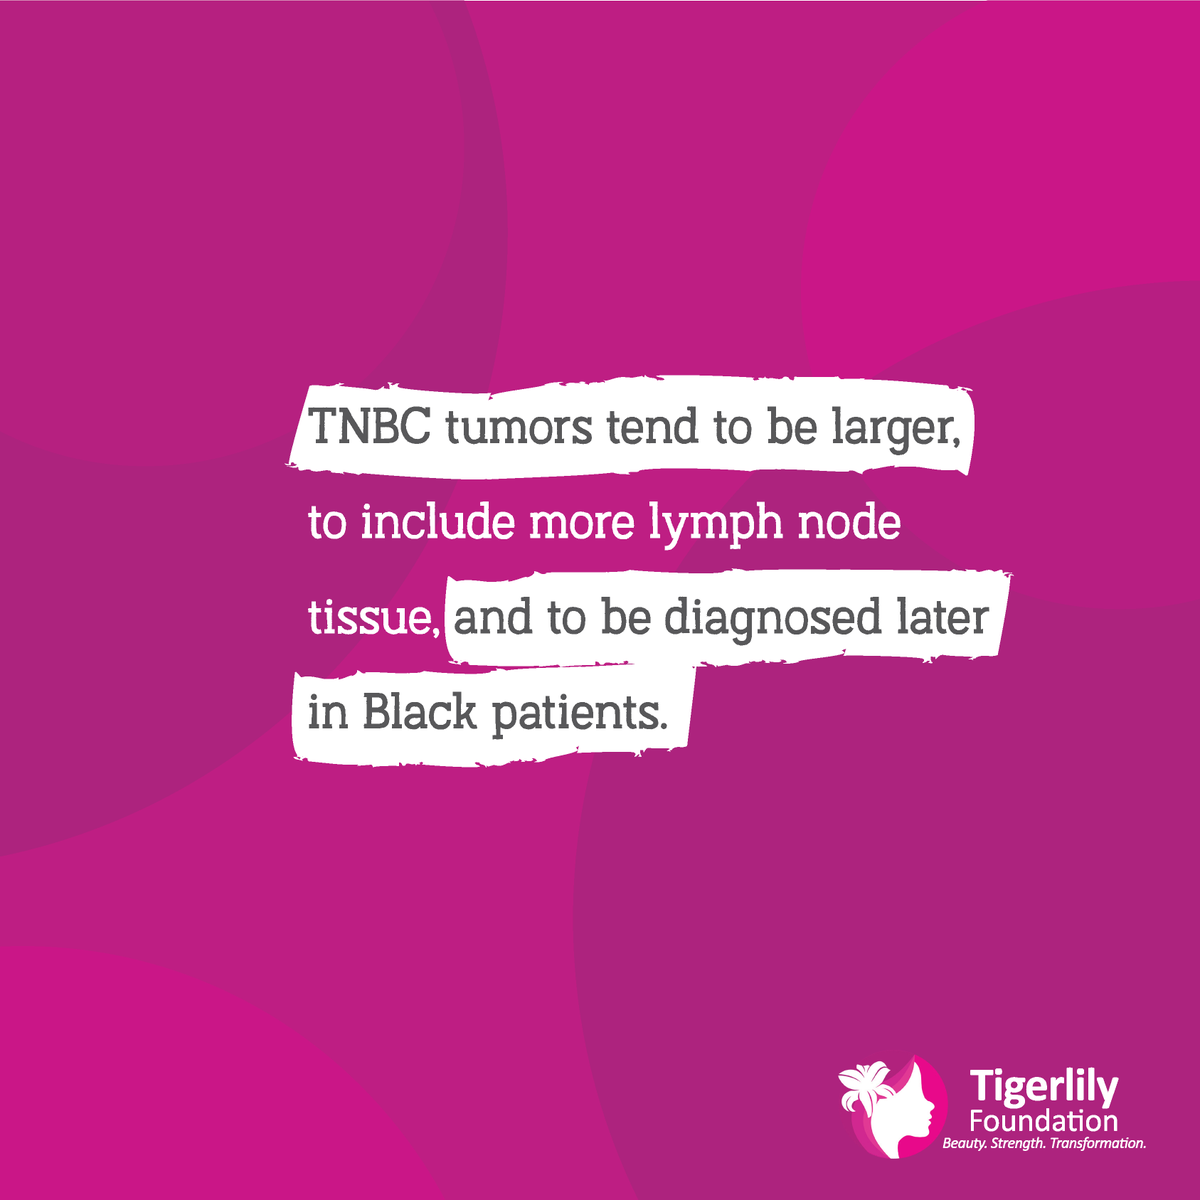 Our co-authored policy brief #Disparities in #ScreeningandDiagnosis for #TNBC captures how difficult it is for #Blackwomen to get a timely and accurate diagnosis for TNBC, partly due to poorly crafted #clinicalguidelines. Read more here: bit.ly/3qLZzNj